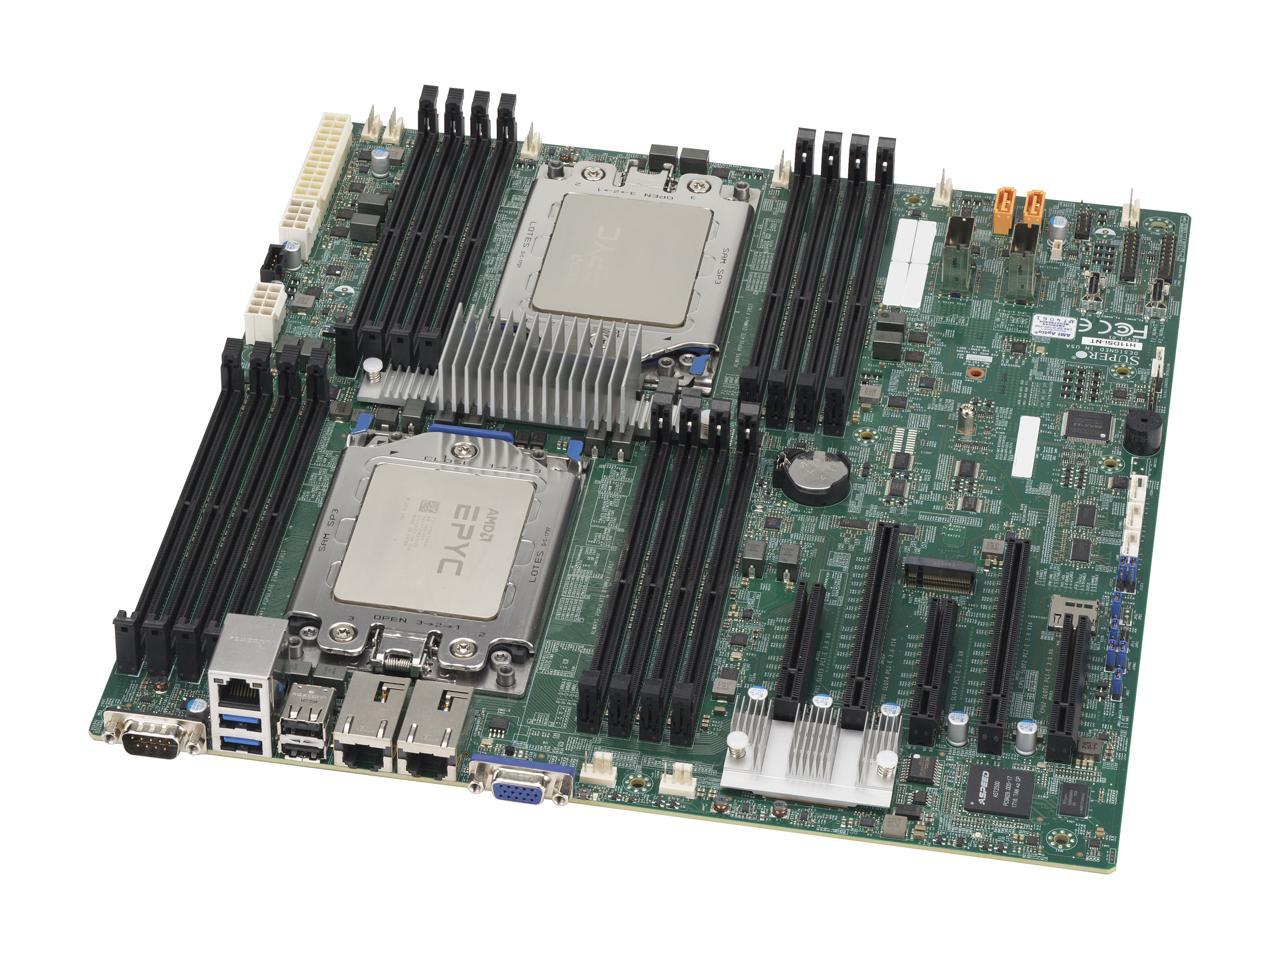 SUPERMICRO MBD-H11DSI-NT Mainboard, Factory Installed with 2 x AMD EPYC  Rome 64 Cores 7702 CPU